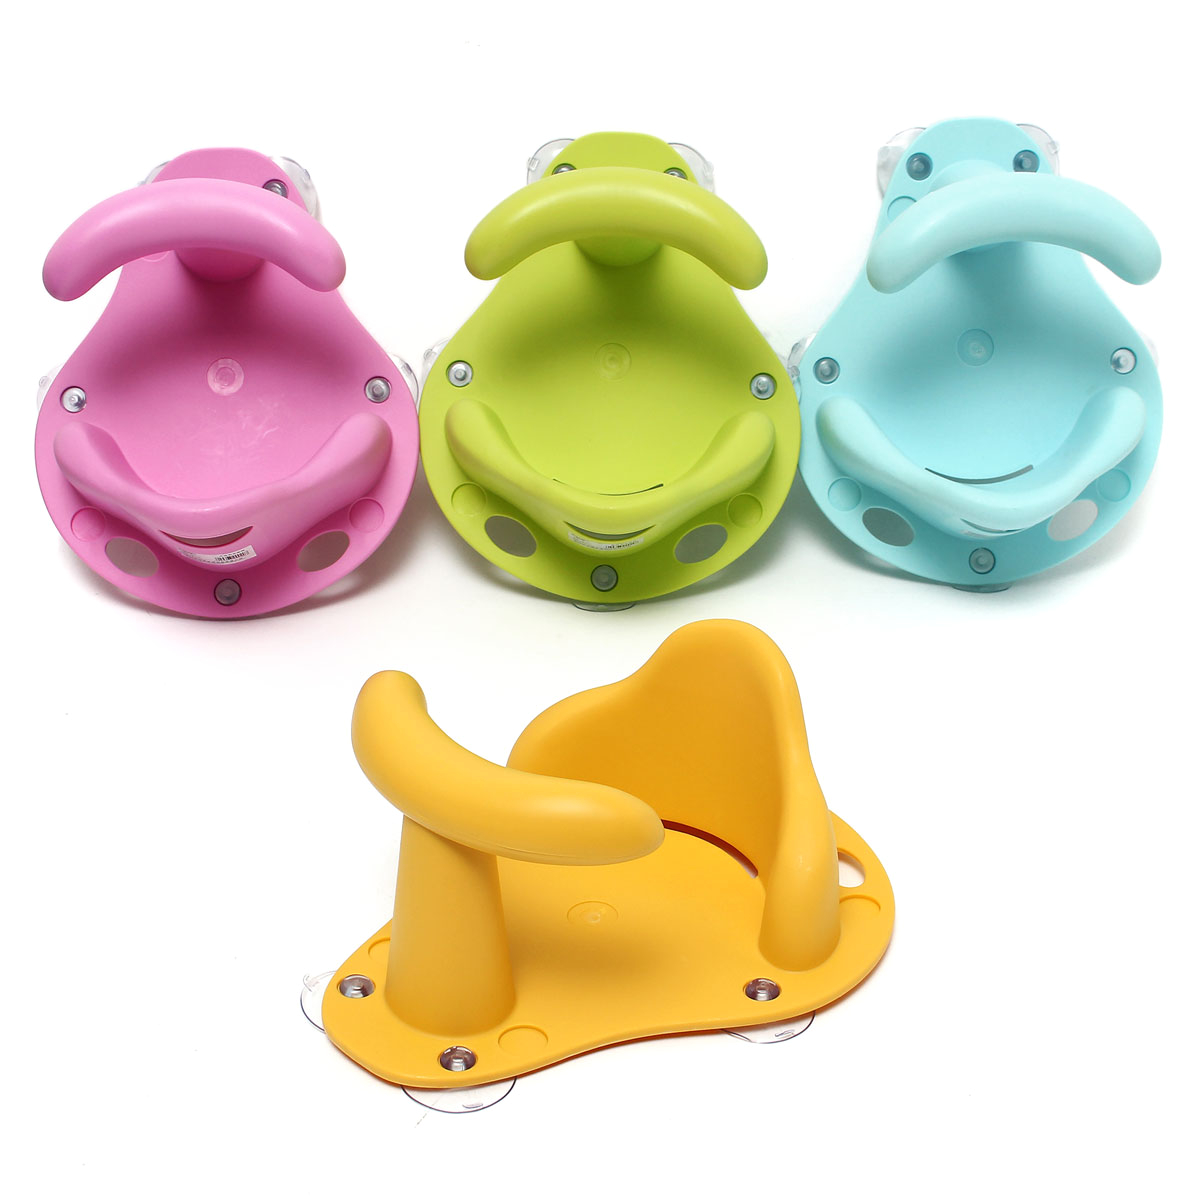 4 colors baby bath tub ring seat infant children shower toddler kids anti slip security safety chair